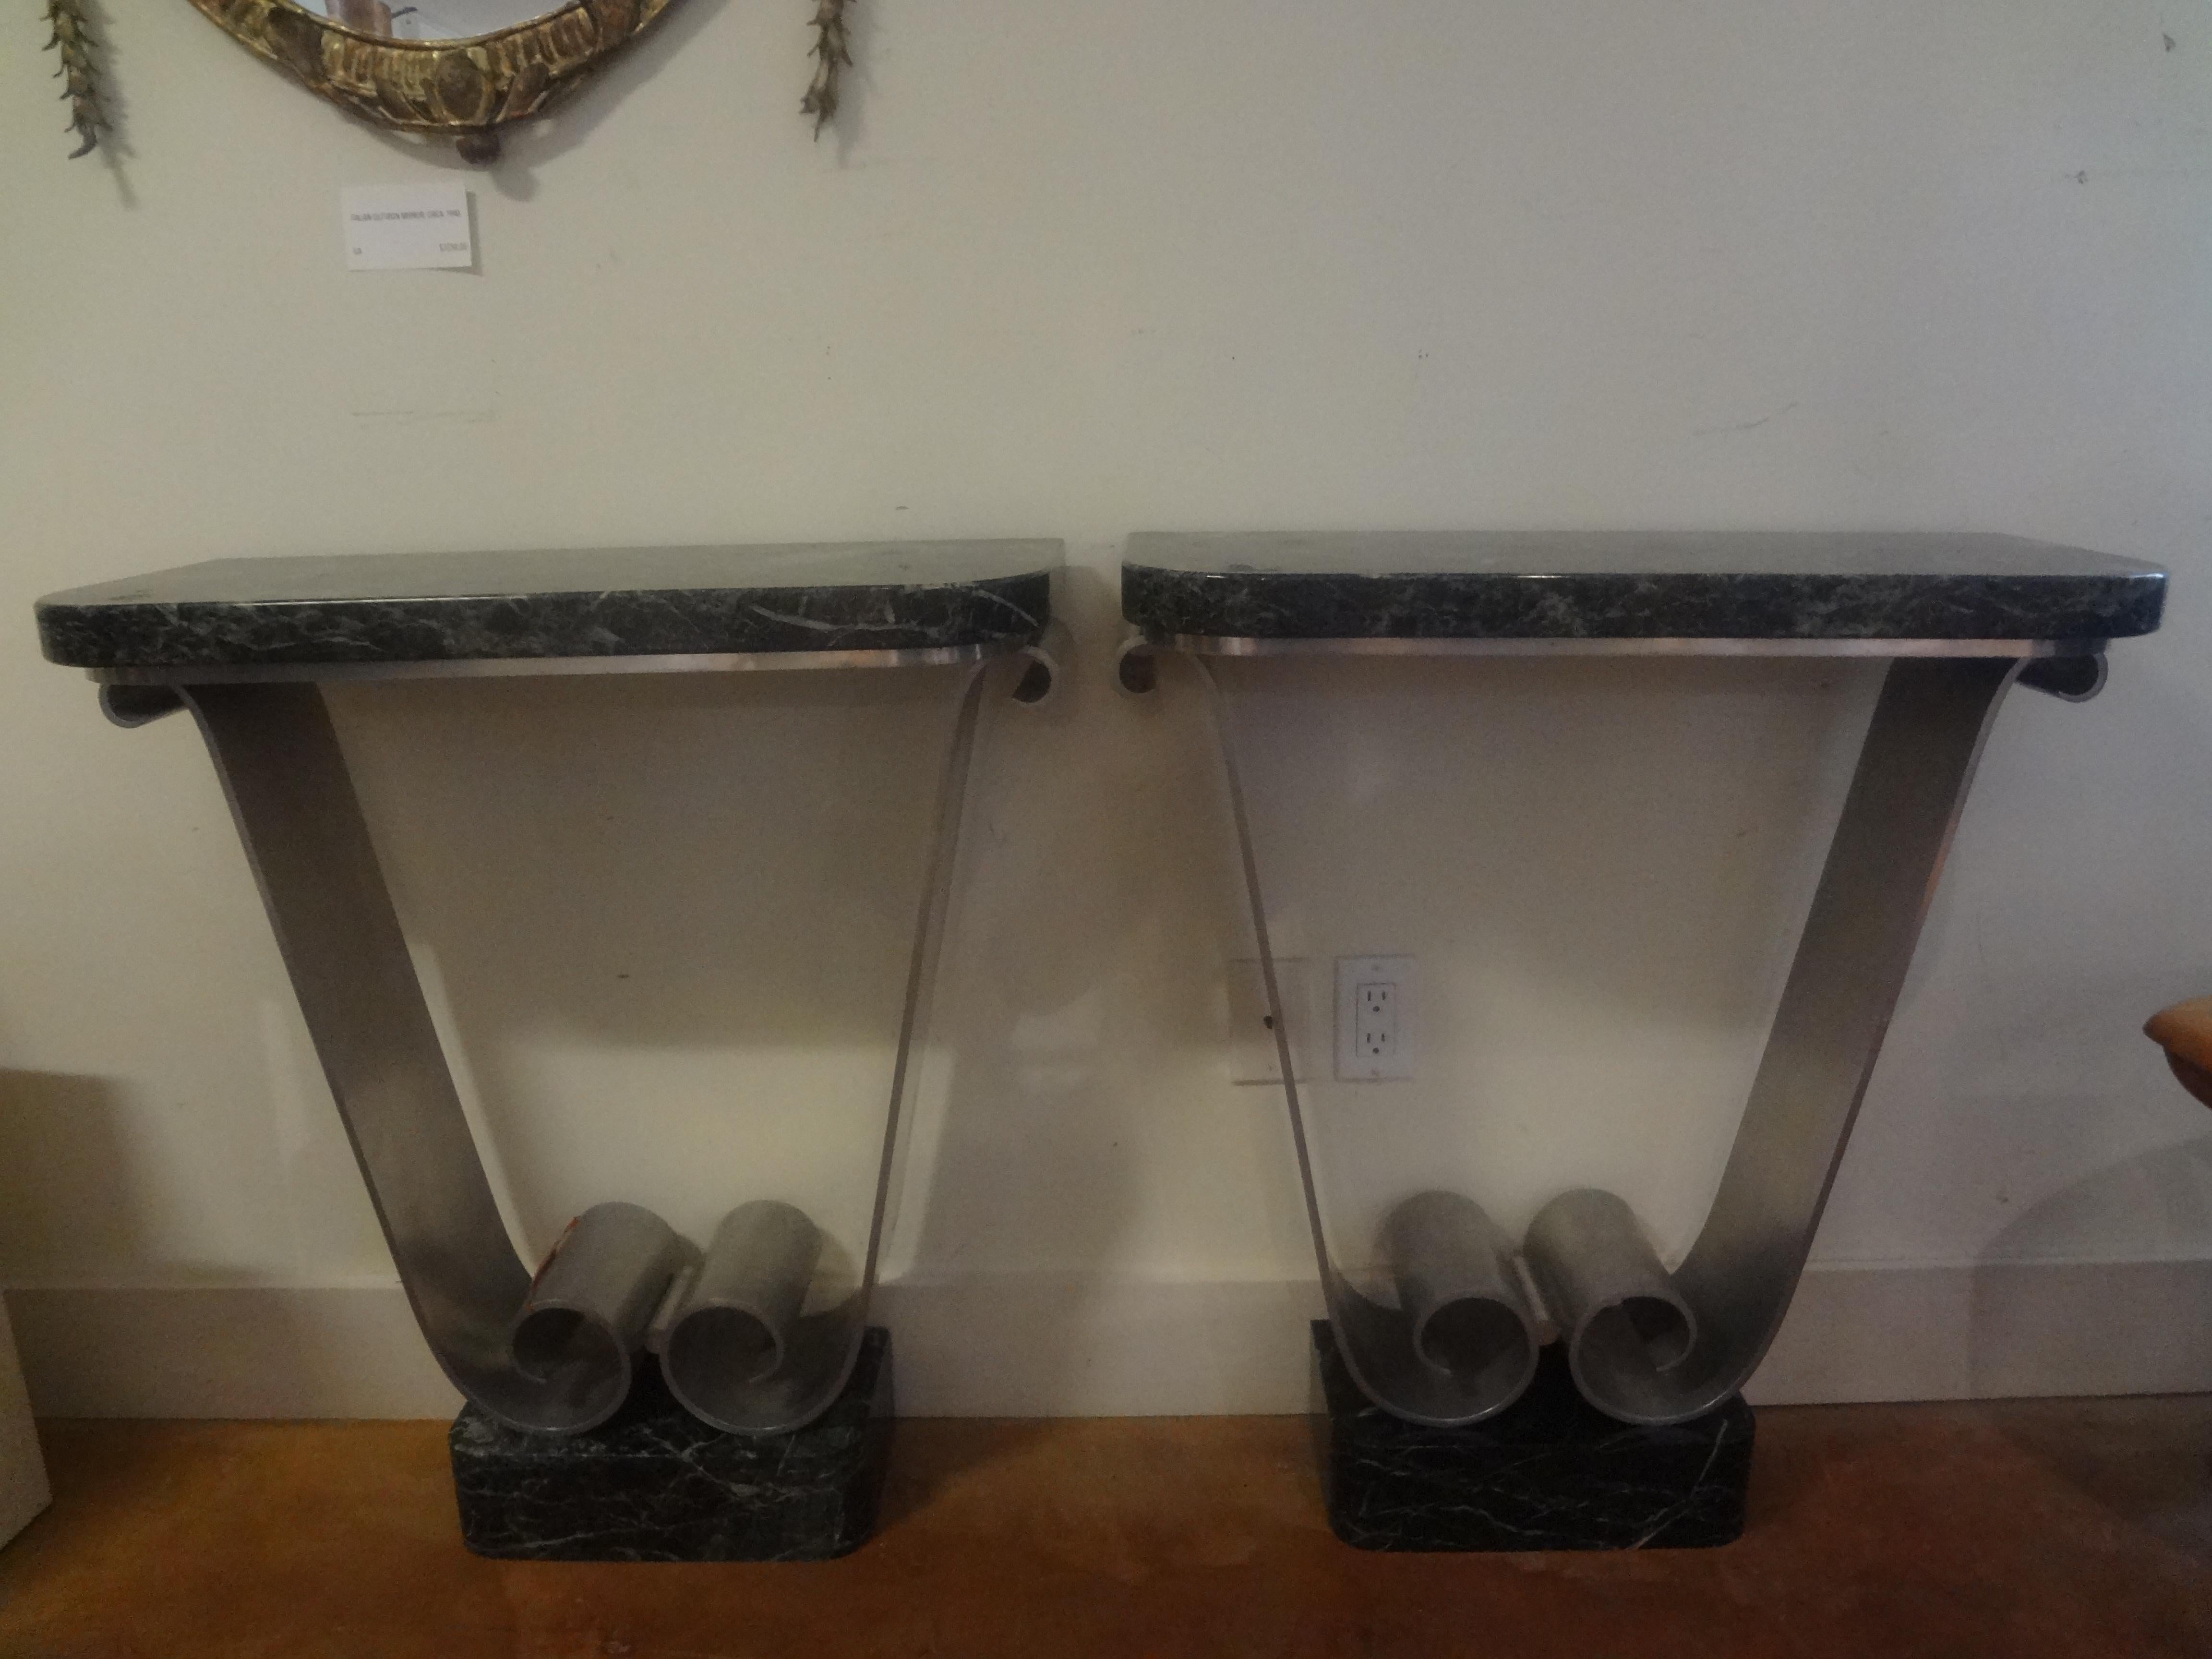 Pair Of French Art Deco Console Tables Attributed To  André Arbus.
These stunning French Art Moderne or French Art Deco u-shaped console tables are constructed of brushed aluminum with 4 inch thick bases and 1.75 inch thick marble tops.
These chic